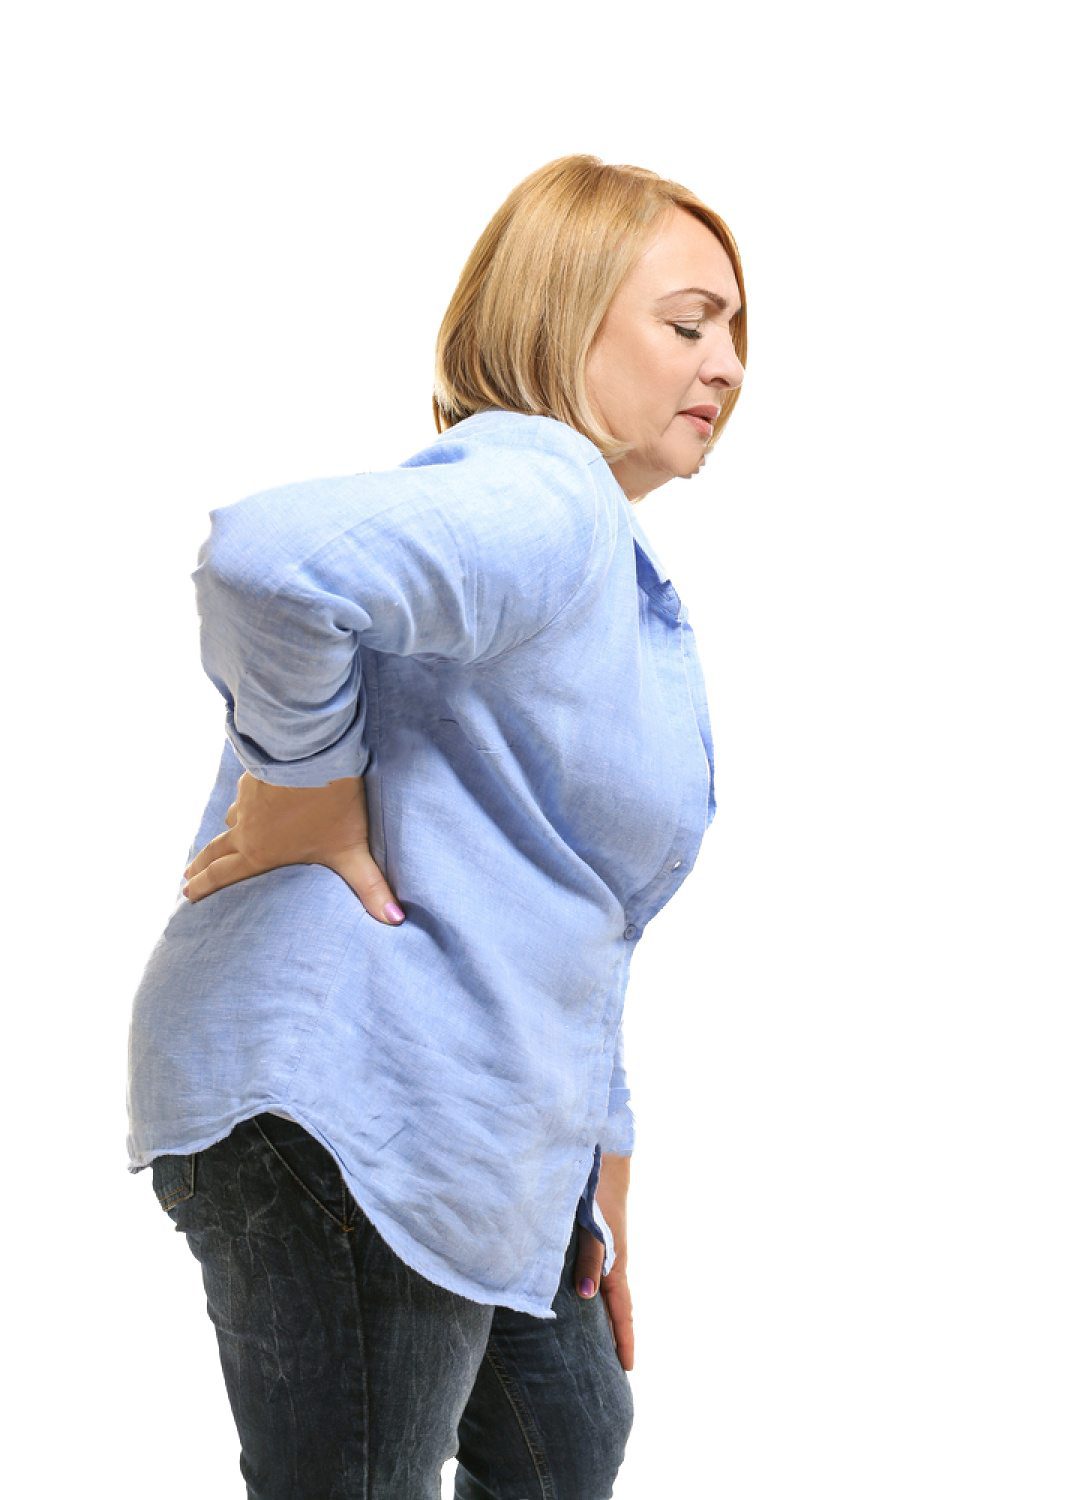 blog picture of older woman with back pain